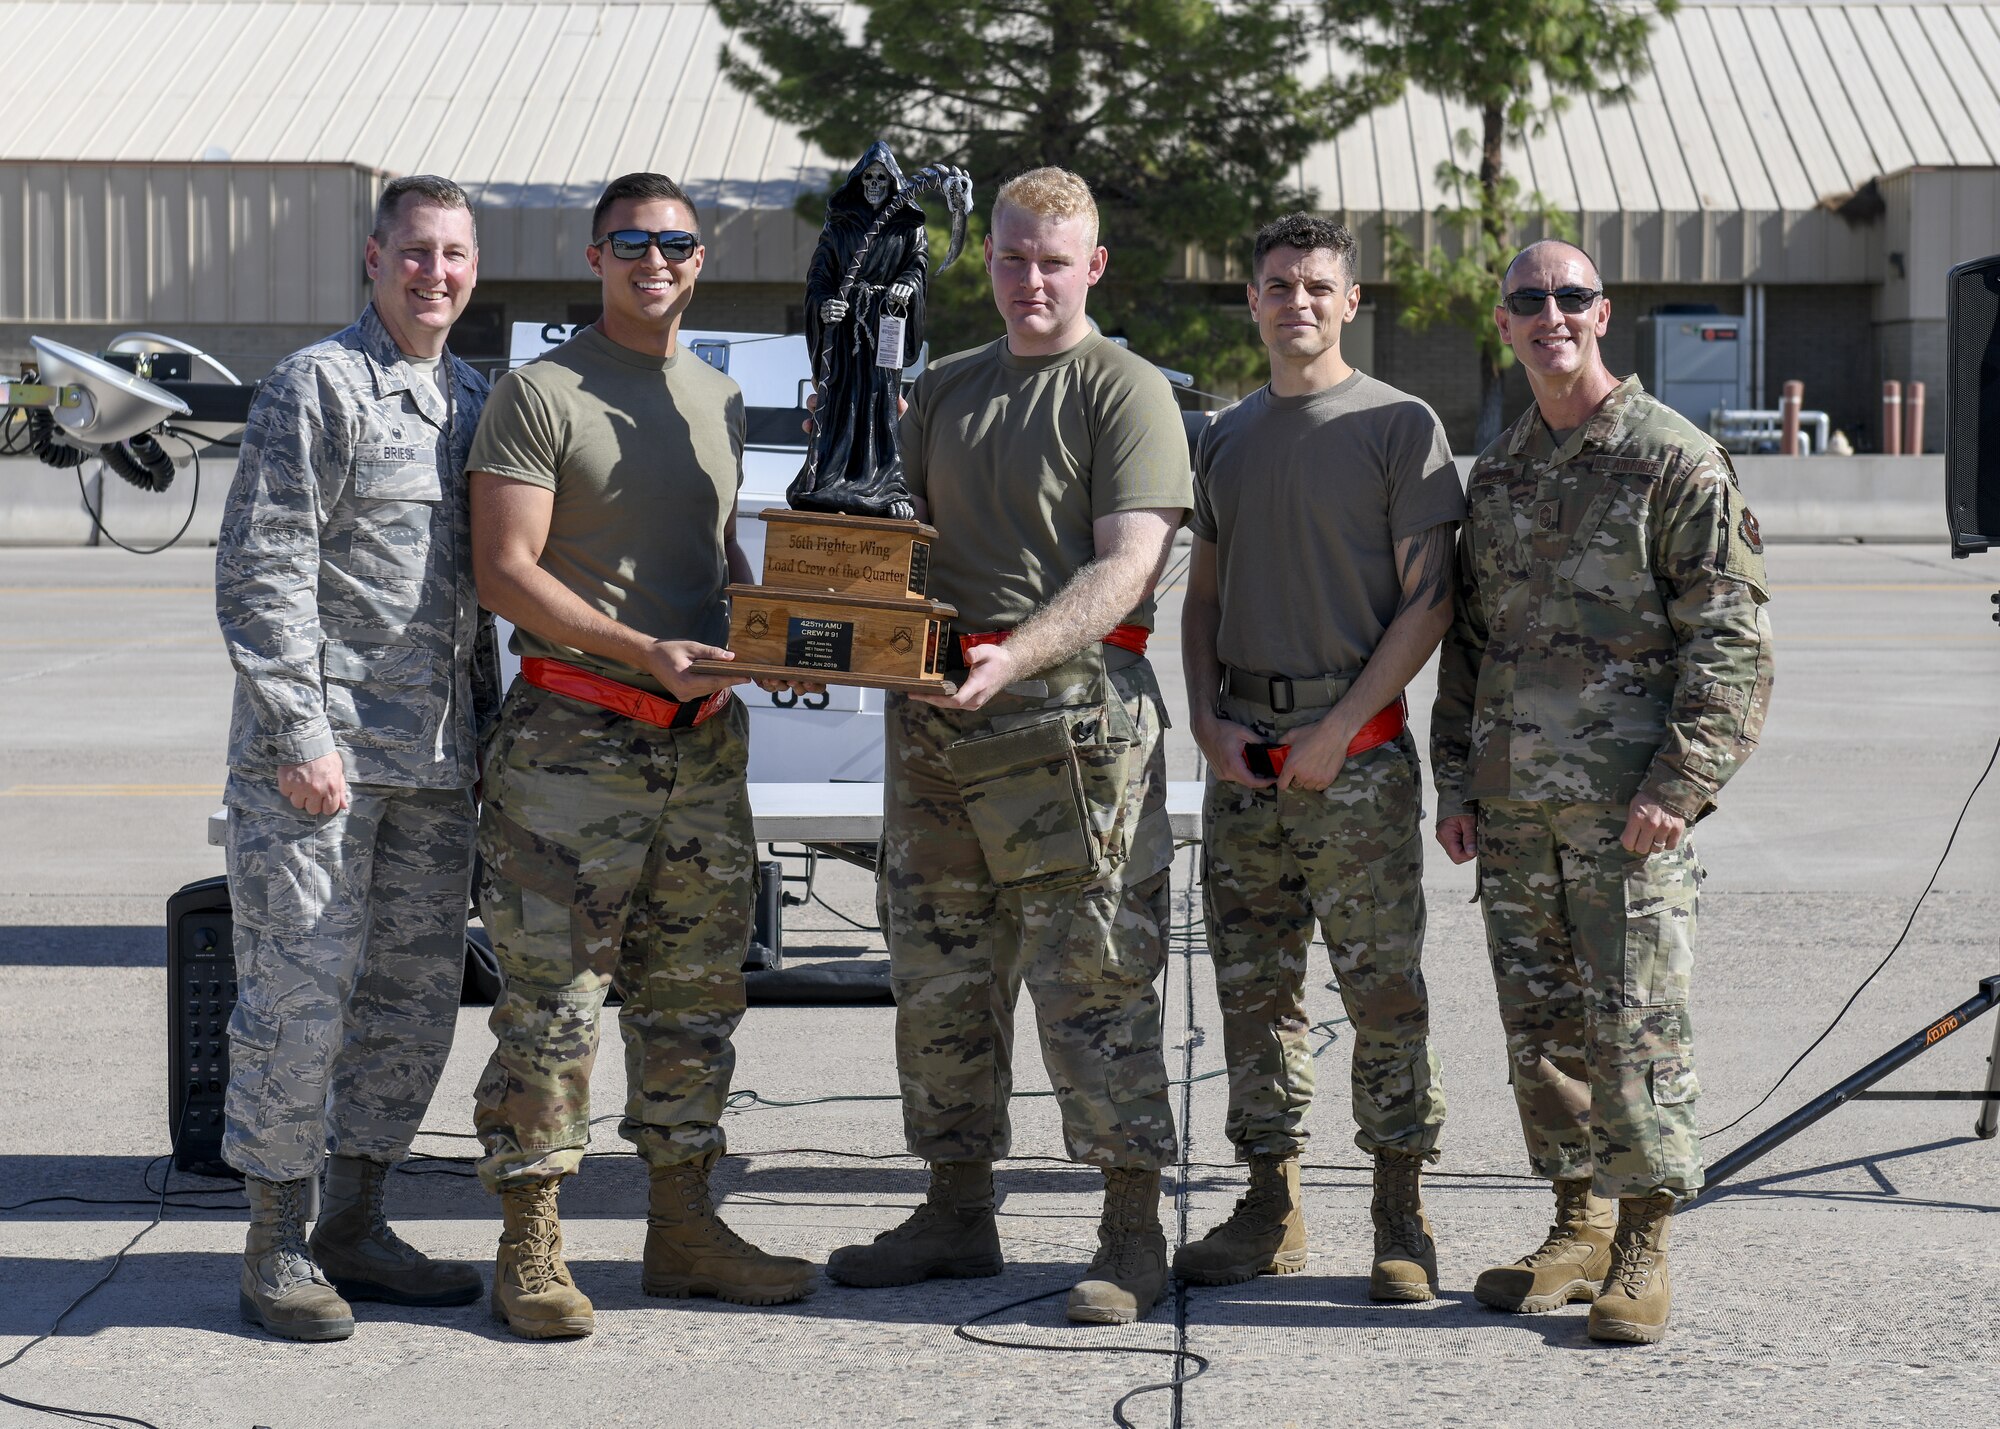 Members from the 63rd Aircraft Maintenance Unit accept a trophy after winning the 3rd Quarter Load Crew Competition Oct. 17, 2019, at Luke Air Force Base, Ariz.